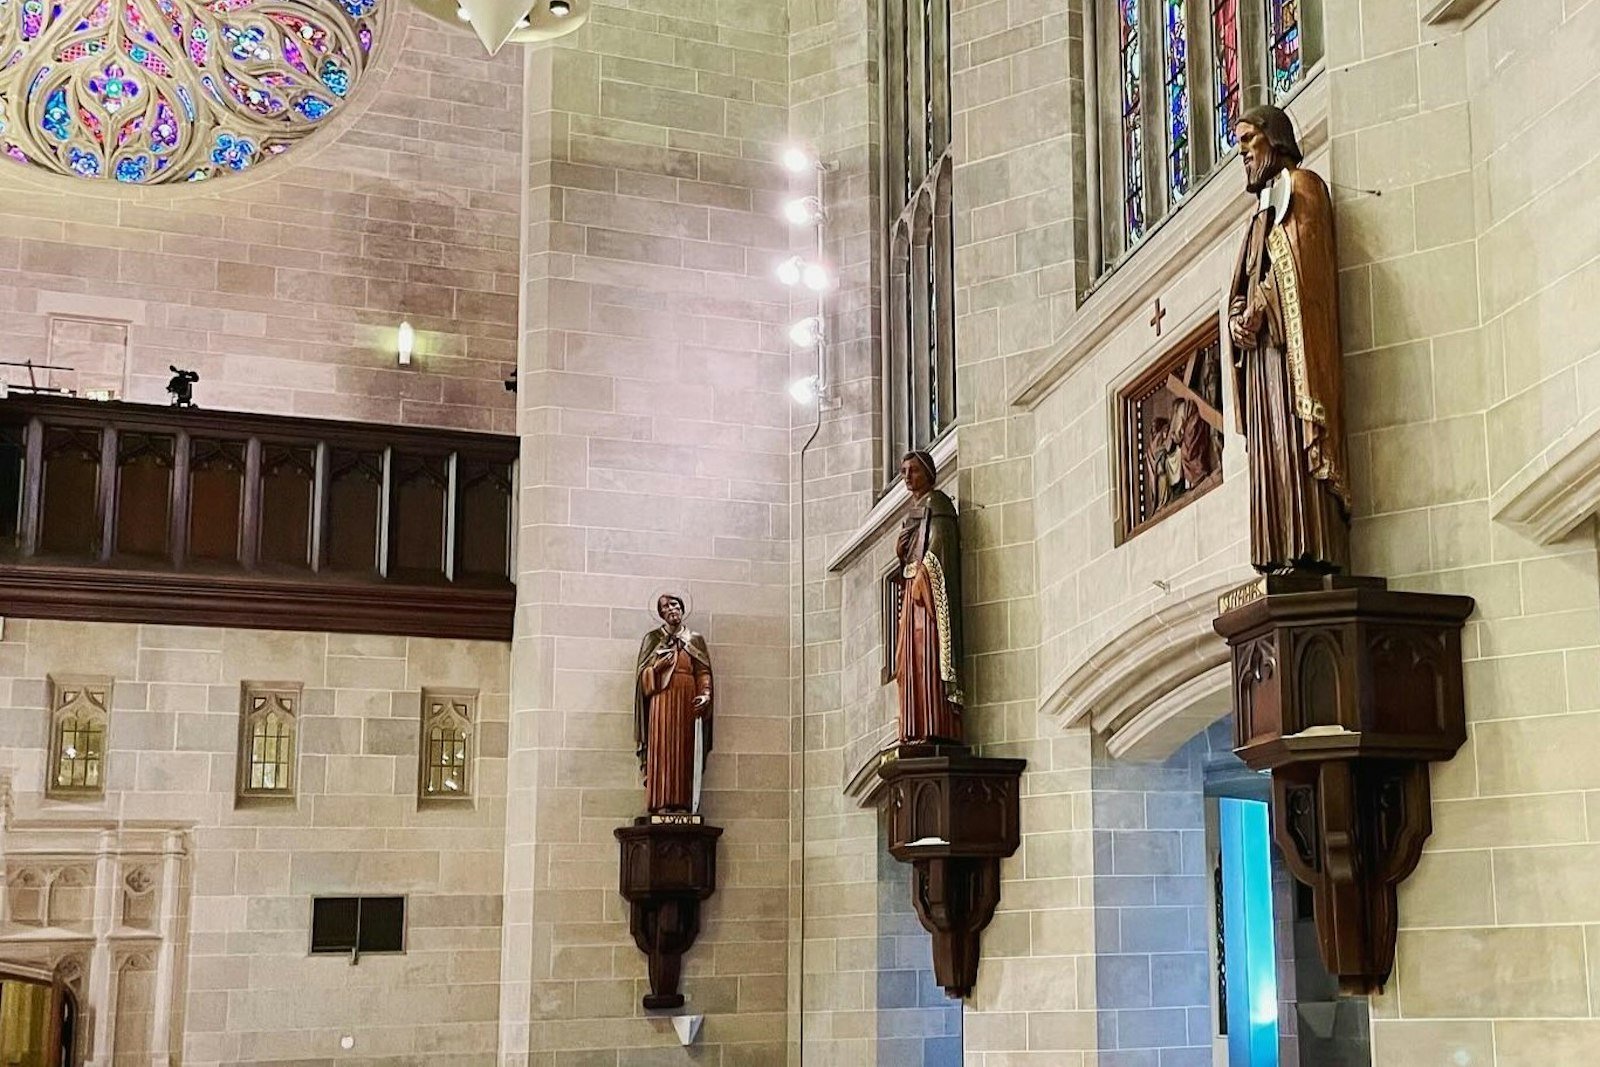 St. Simon, St. Thomas and St. Mathias are pictured in their permanent fixtures atop the pillars inside the Cathedral of the Most Blessed Sacrament. The statues and relics of the apostles will be officially unveiled Feb. 8 as part of a permanent pilgrimage experience at the cathedral, "Journey with the Saints."